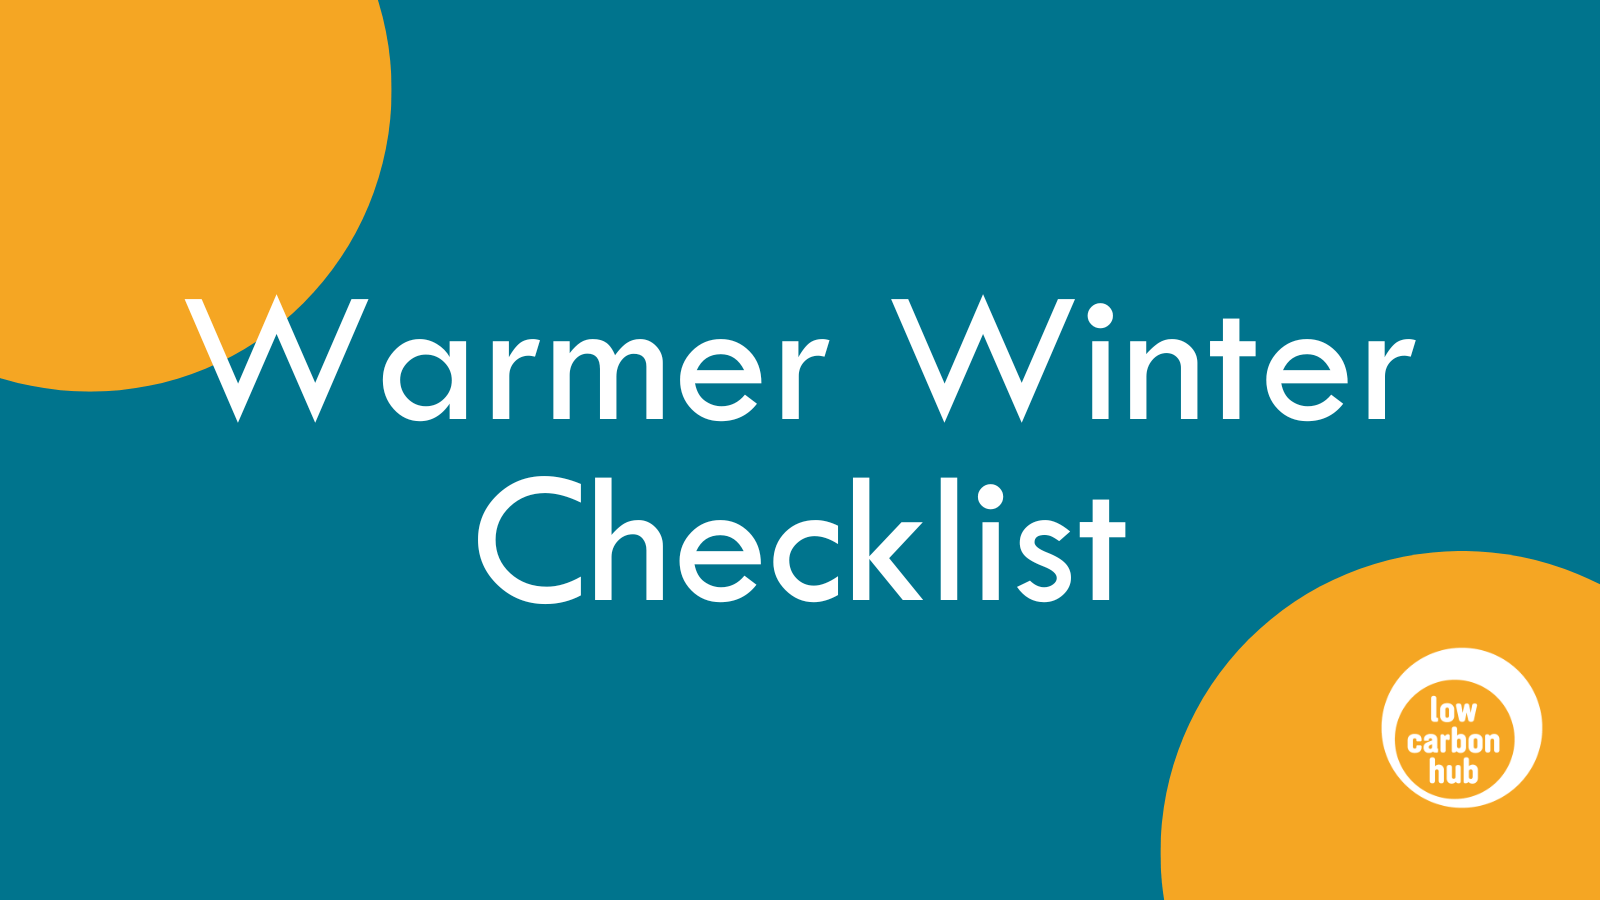 Checklist for a Warmer Winter Low Carbon Hub